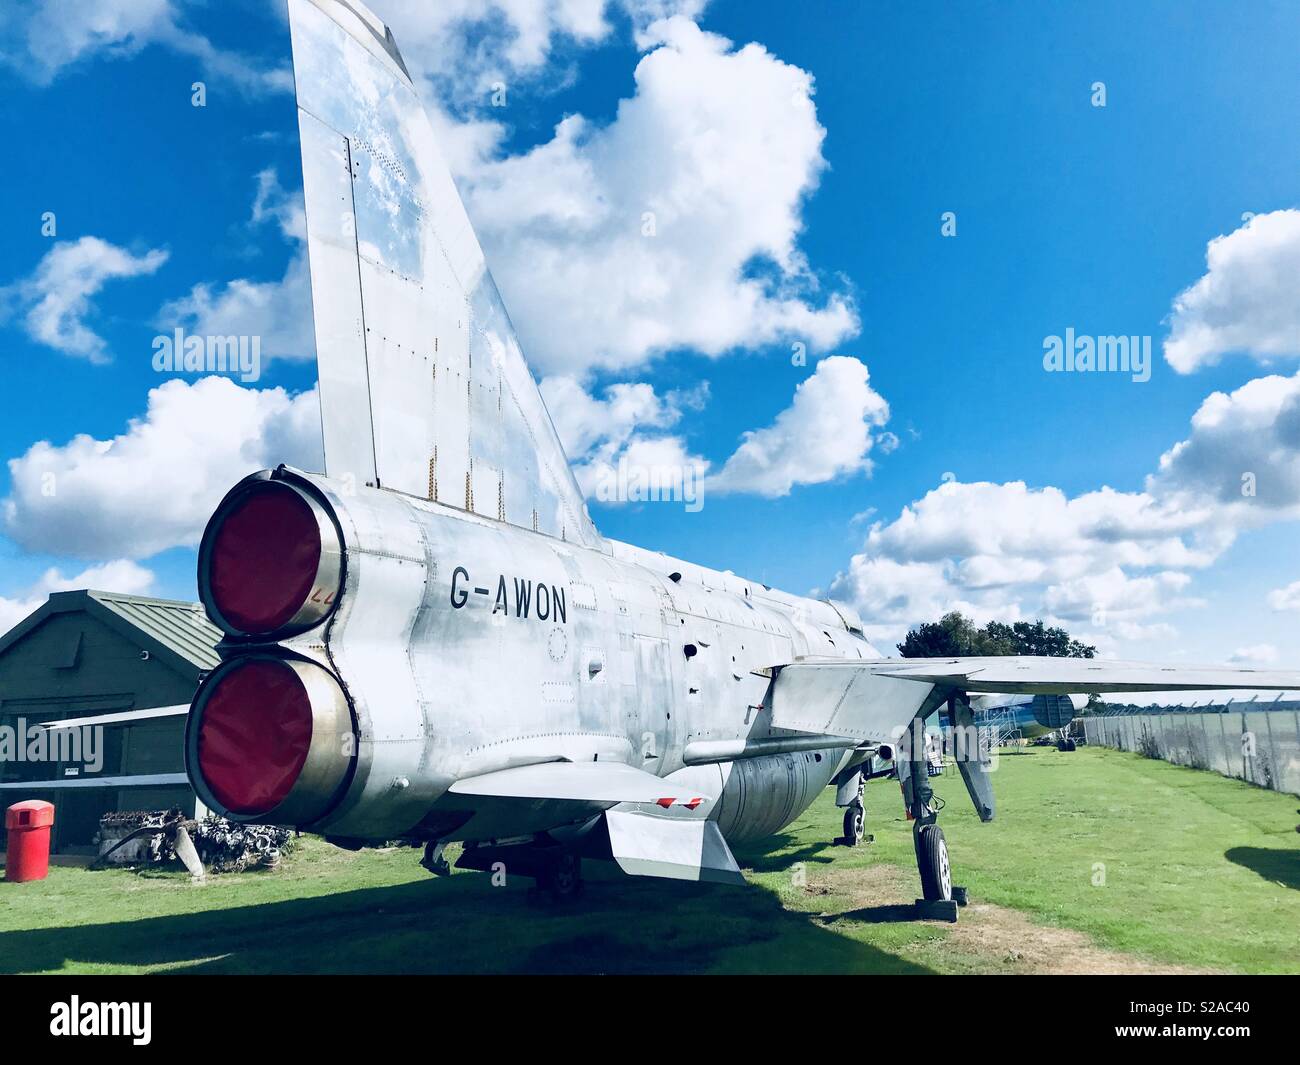 Rear view of a lightening aircraft Stock Photo